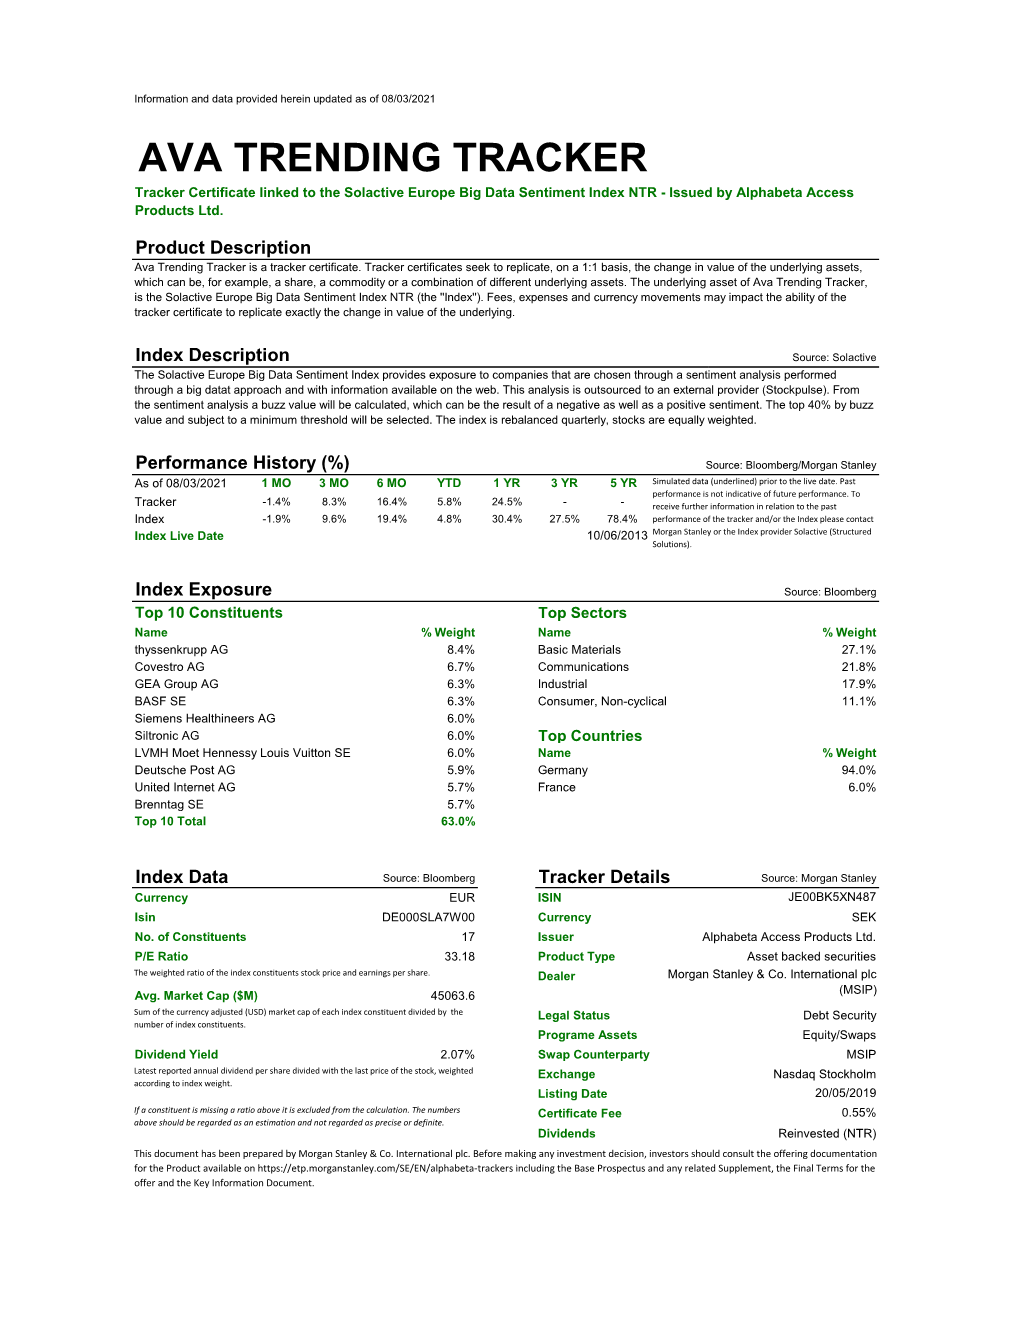 AVA TRENDING TRACKER Tracker Certificate Linked to the Solactive Europe Big Data Sentiment Index NTR - Issued by Alphabeta Access Products Ltd